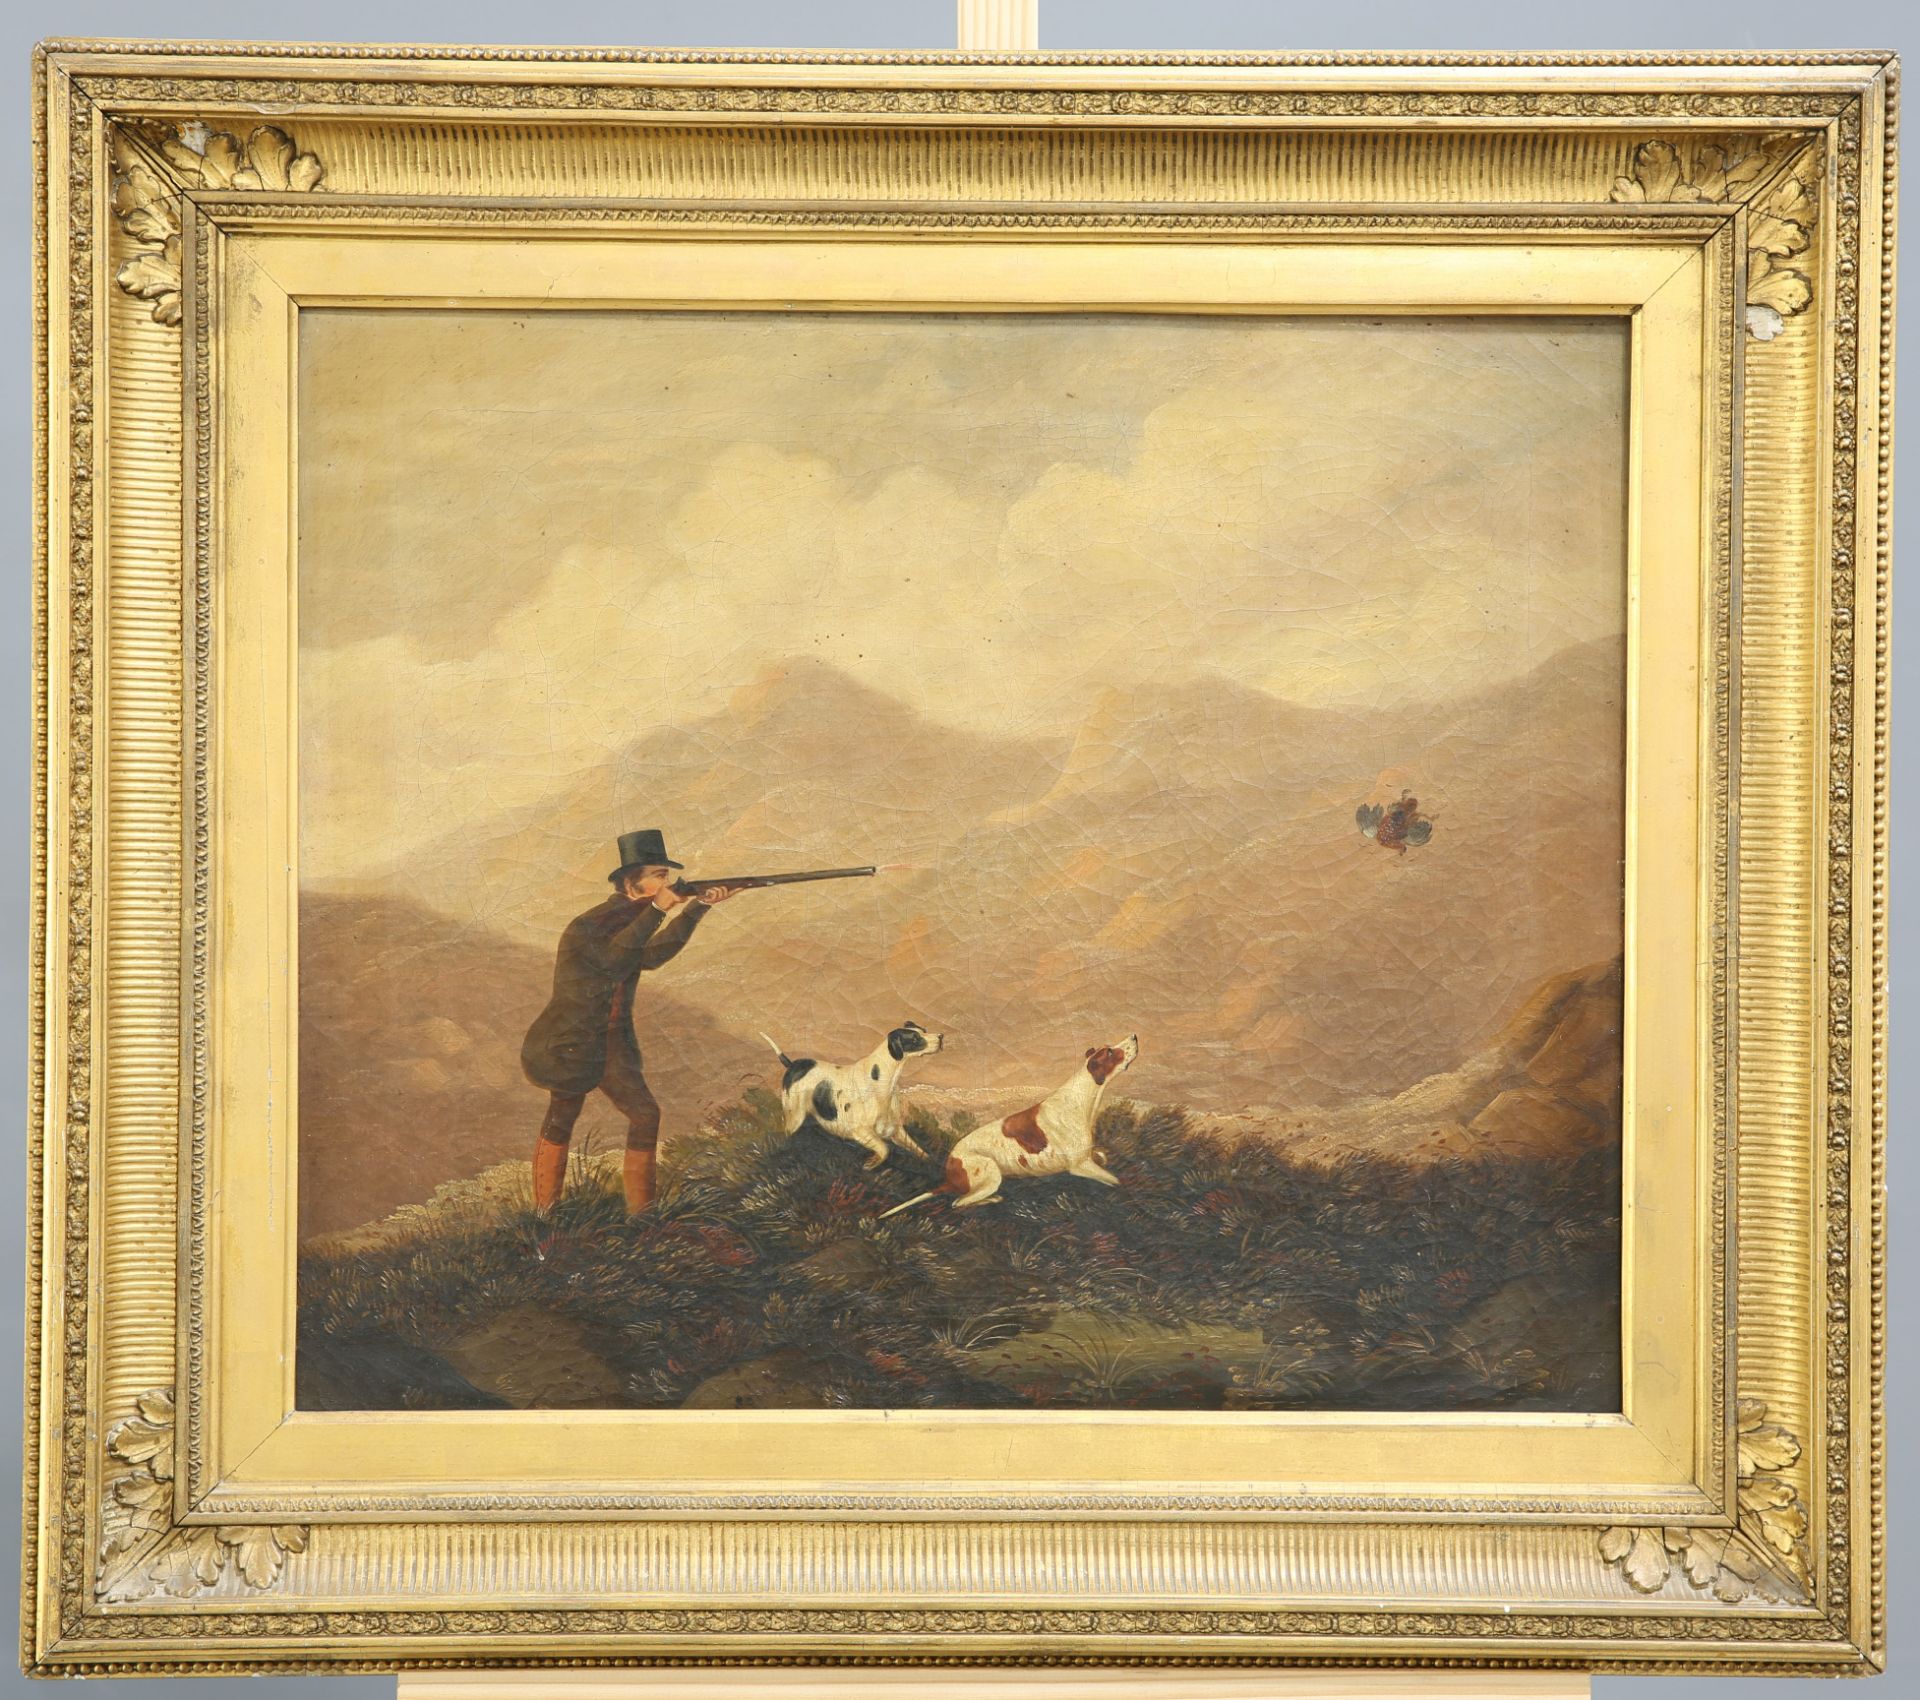 ENGLISH SCHOOL (18TH CENTURY), A SPORTSMAN AND HIS DOGS IN A LAKELAND LANDSCAPE, A PAIR, oil on